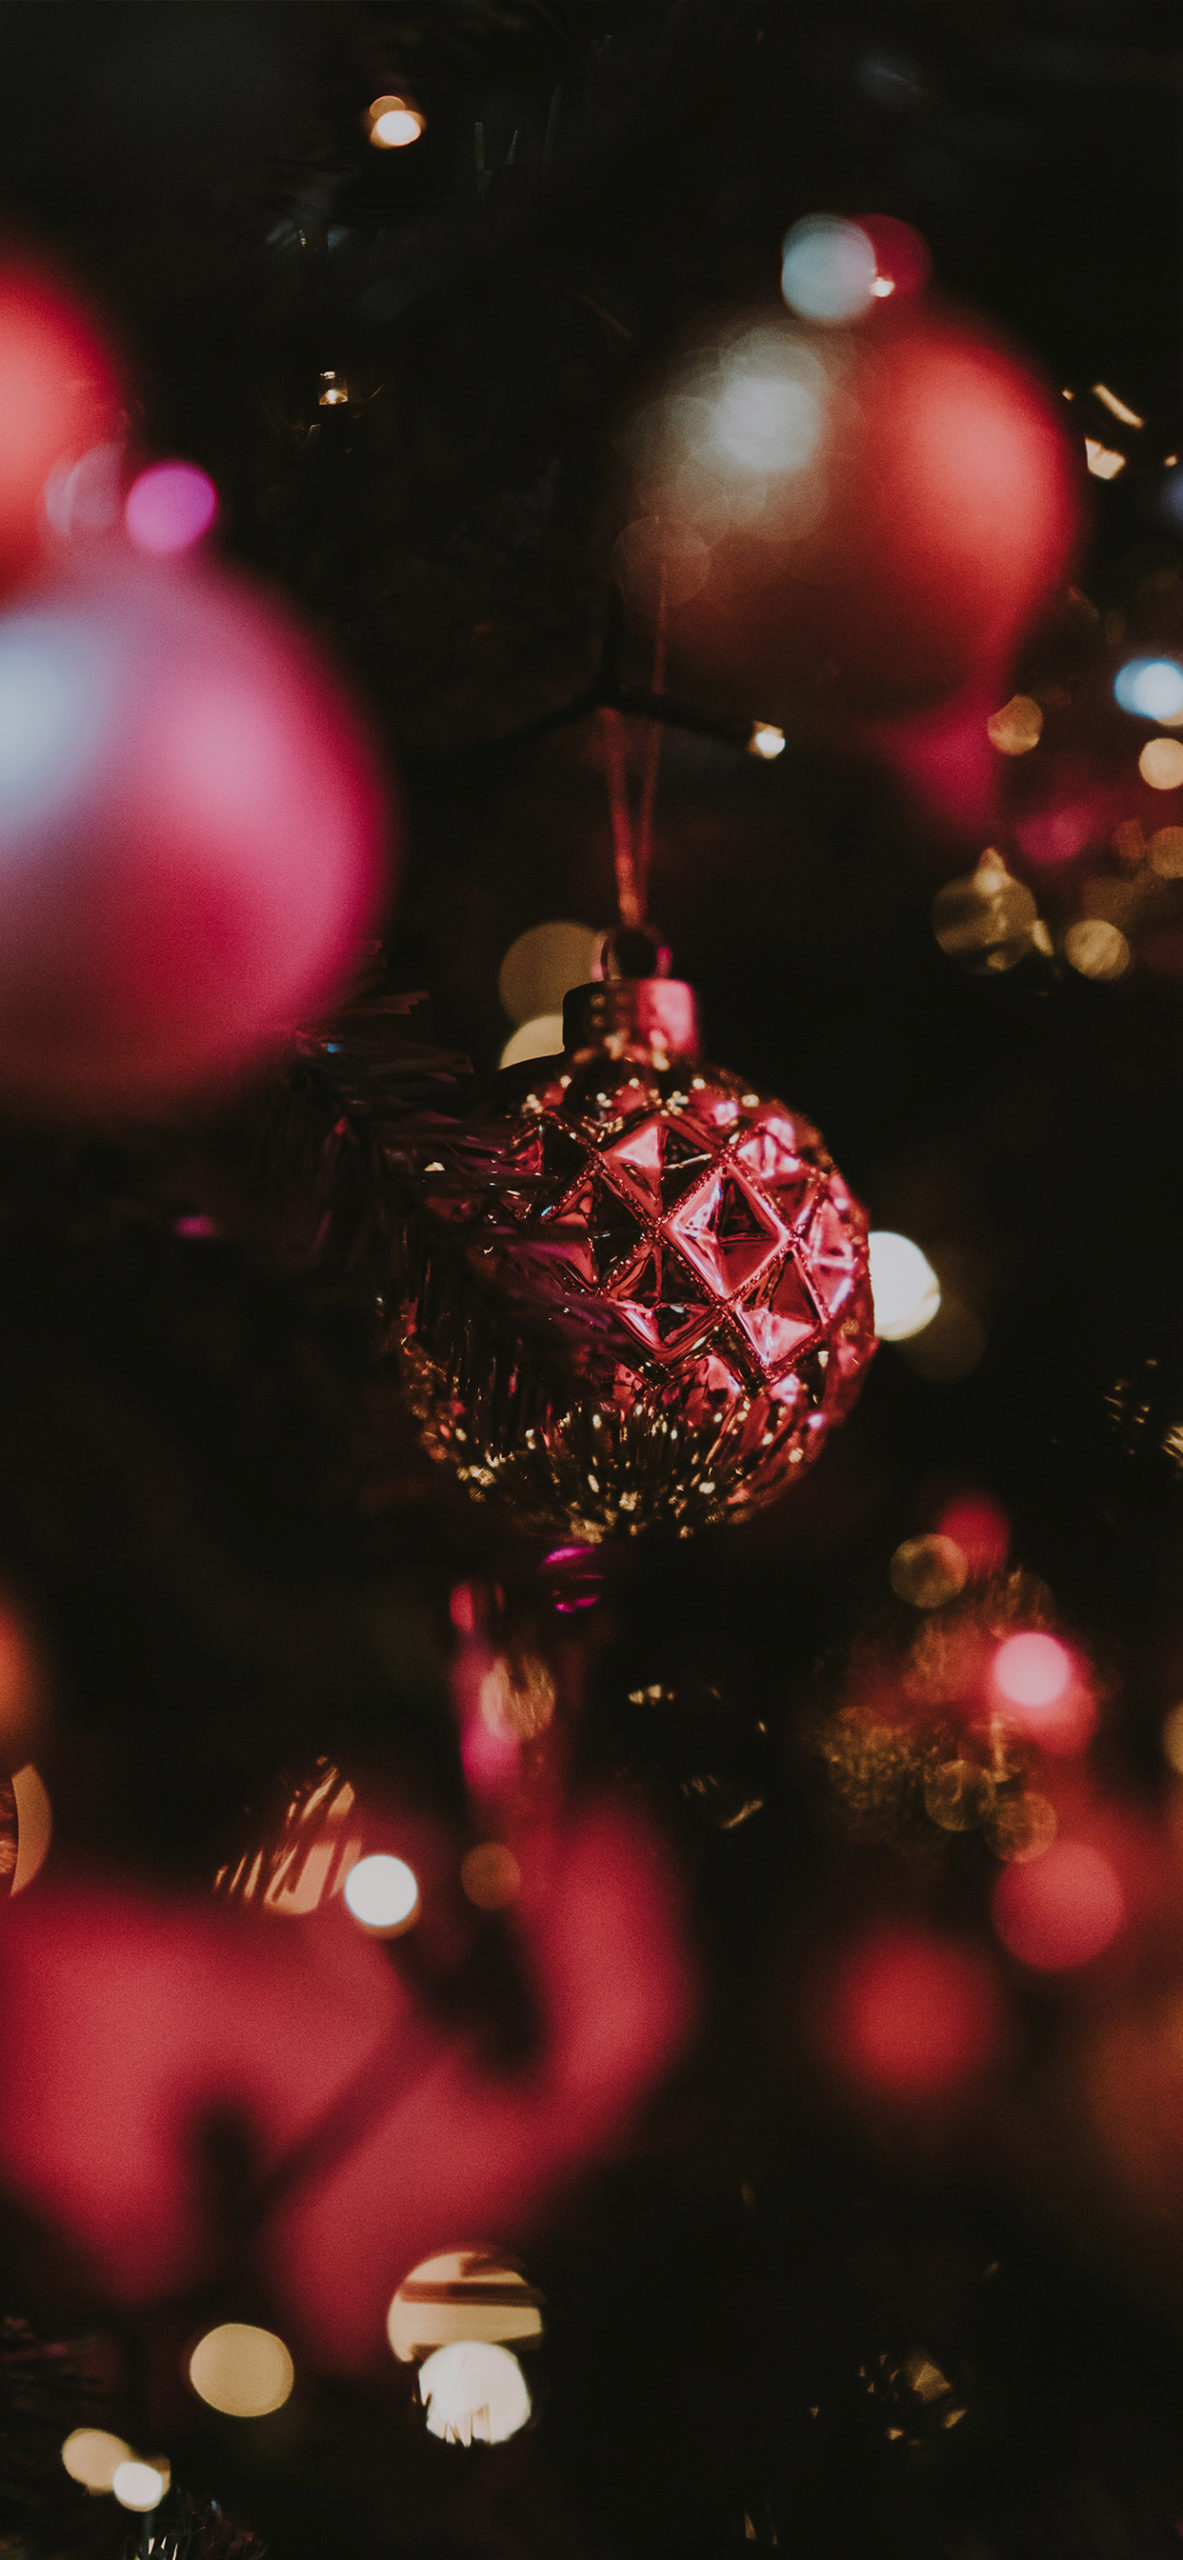 Christmas balls Wallpaper for iPhone Pro Max, X, 6